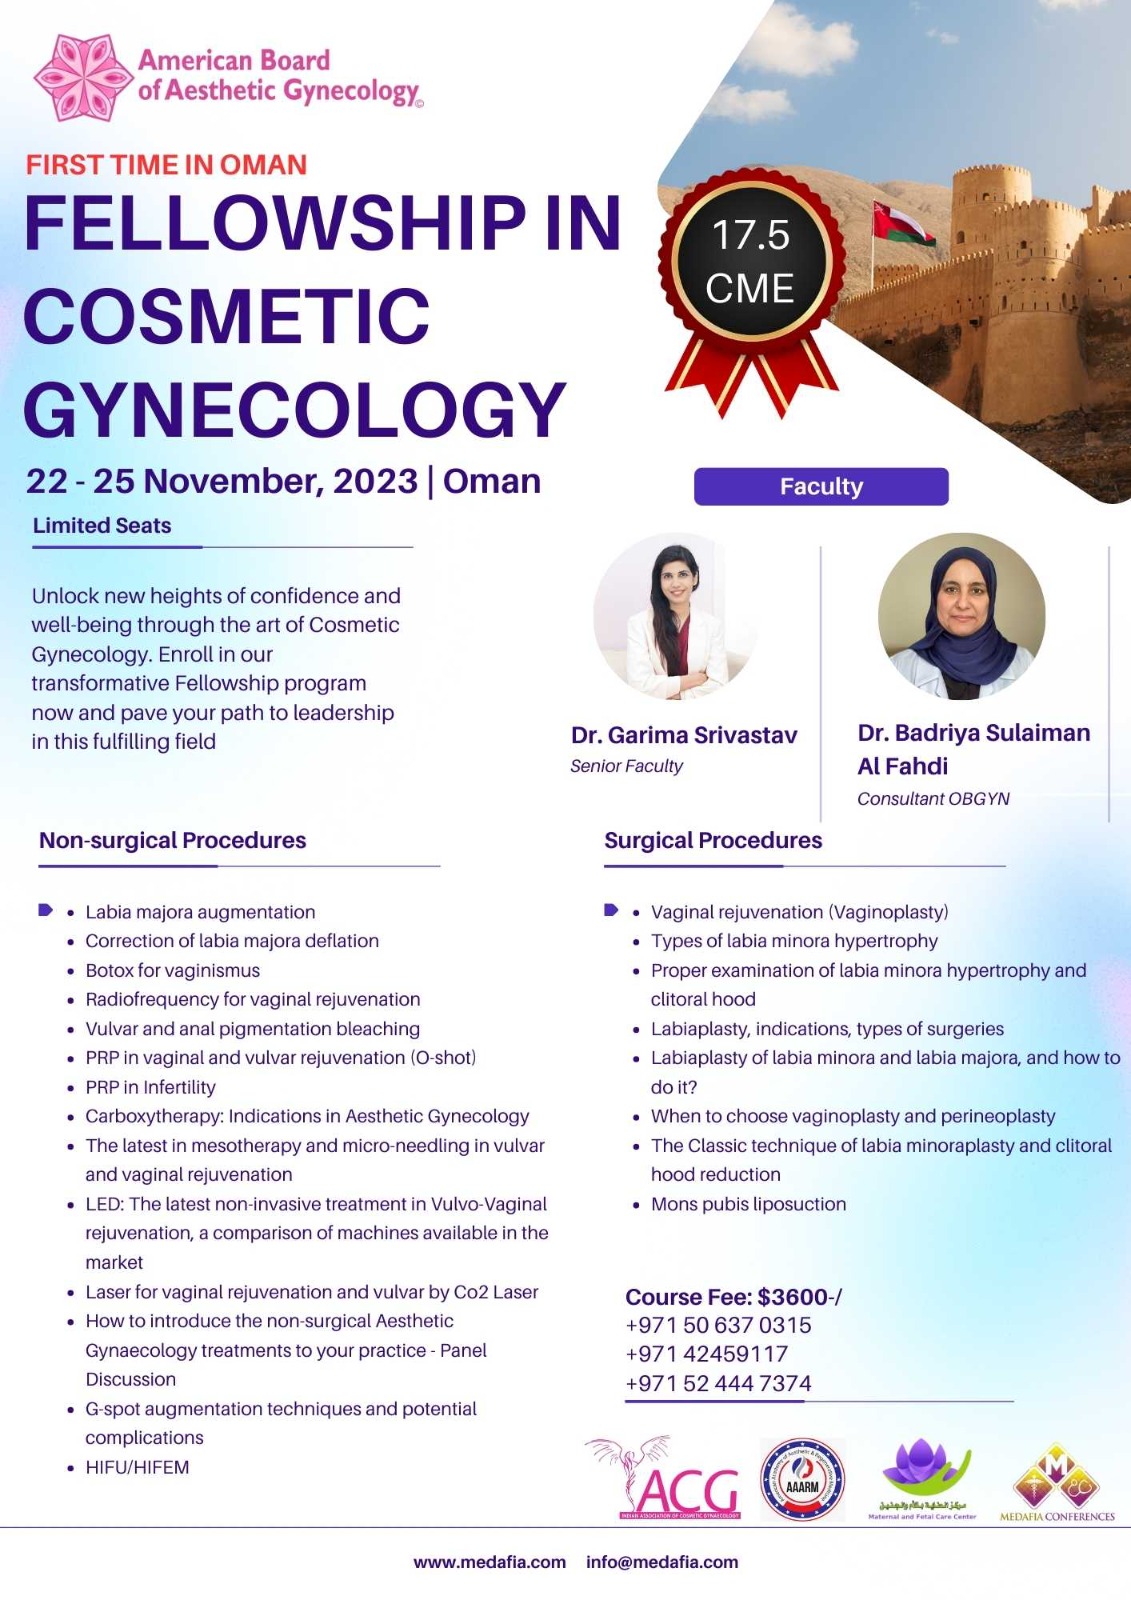 Fellowship in Cosmetic Gynecology